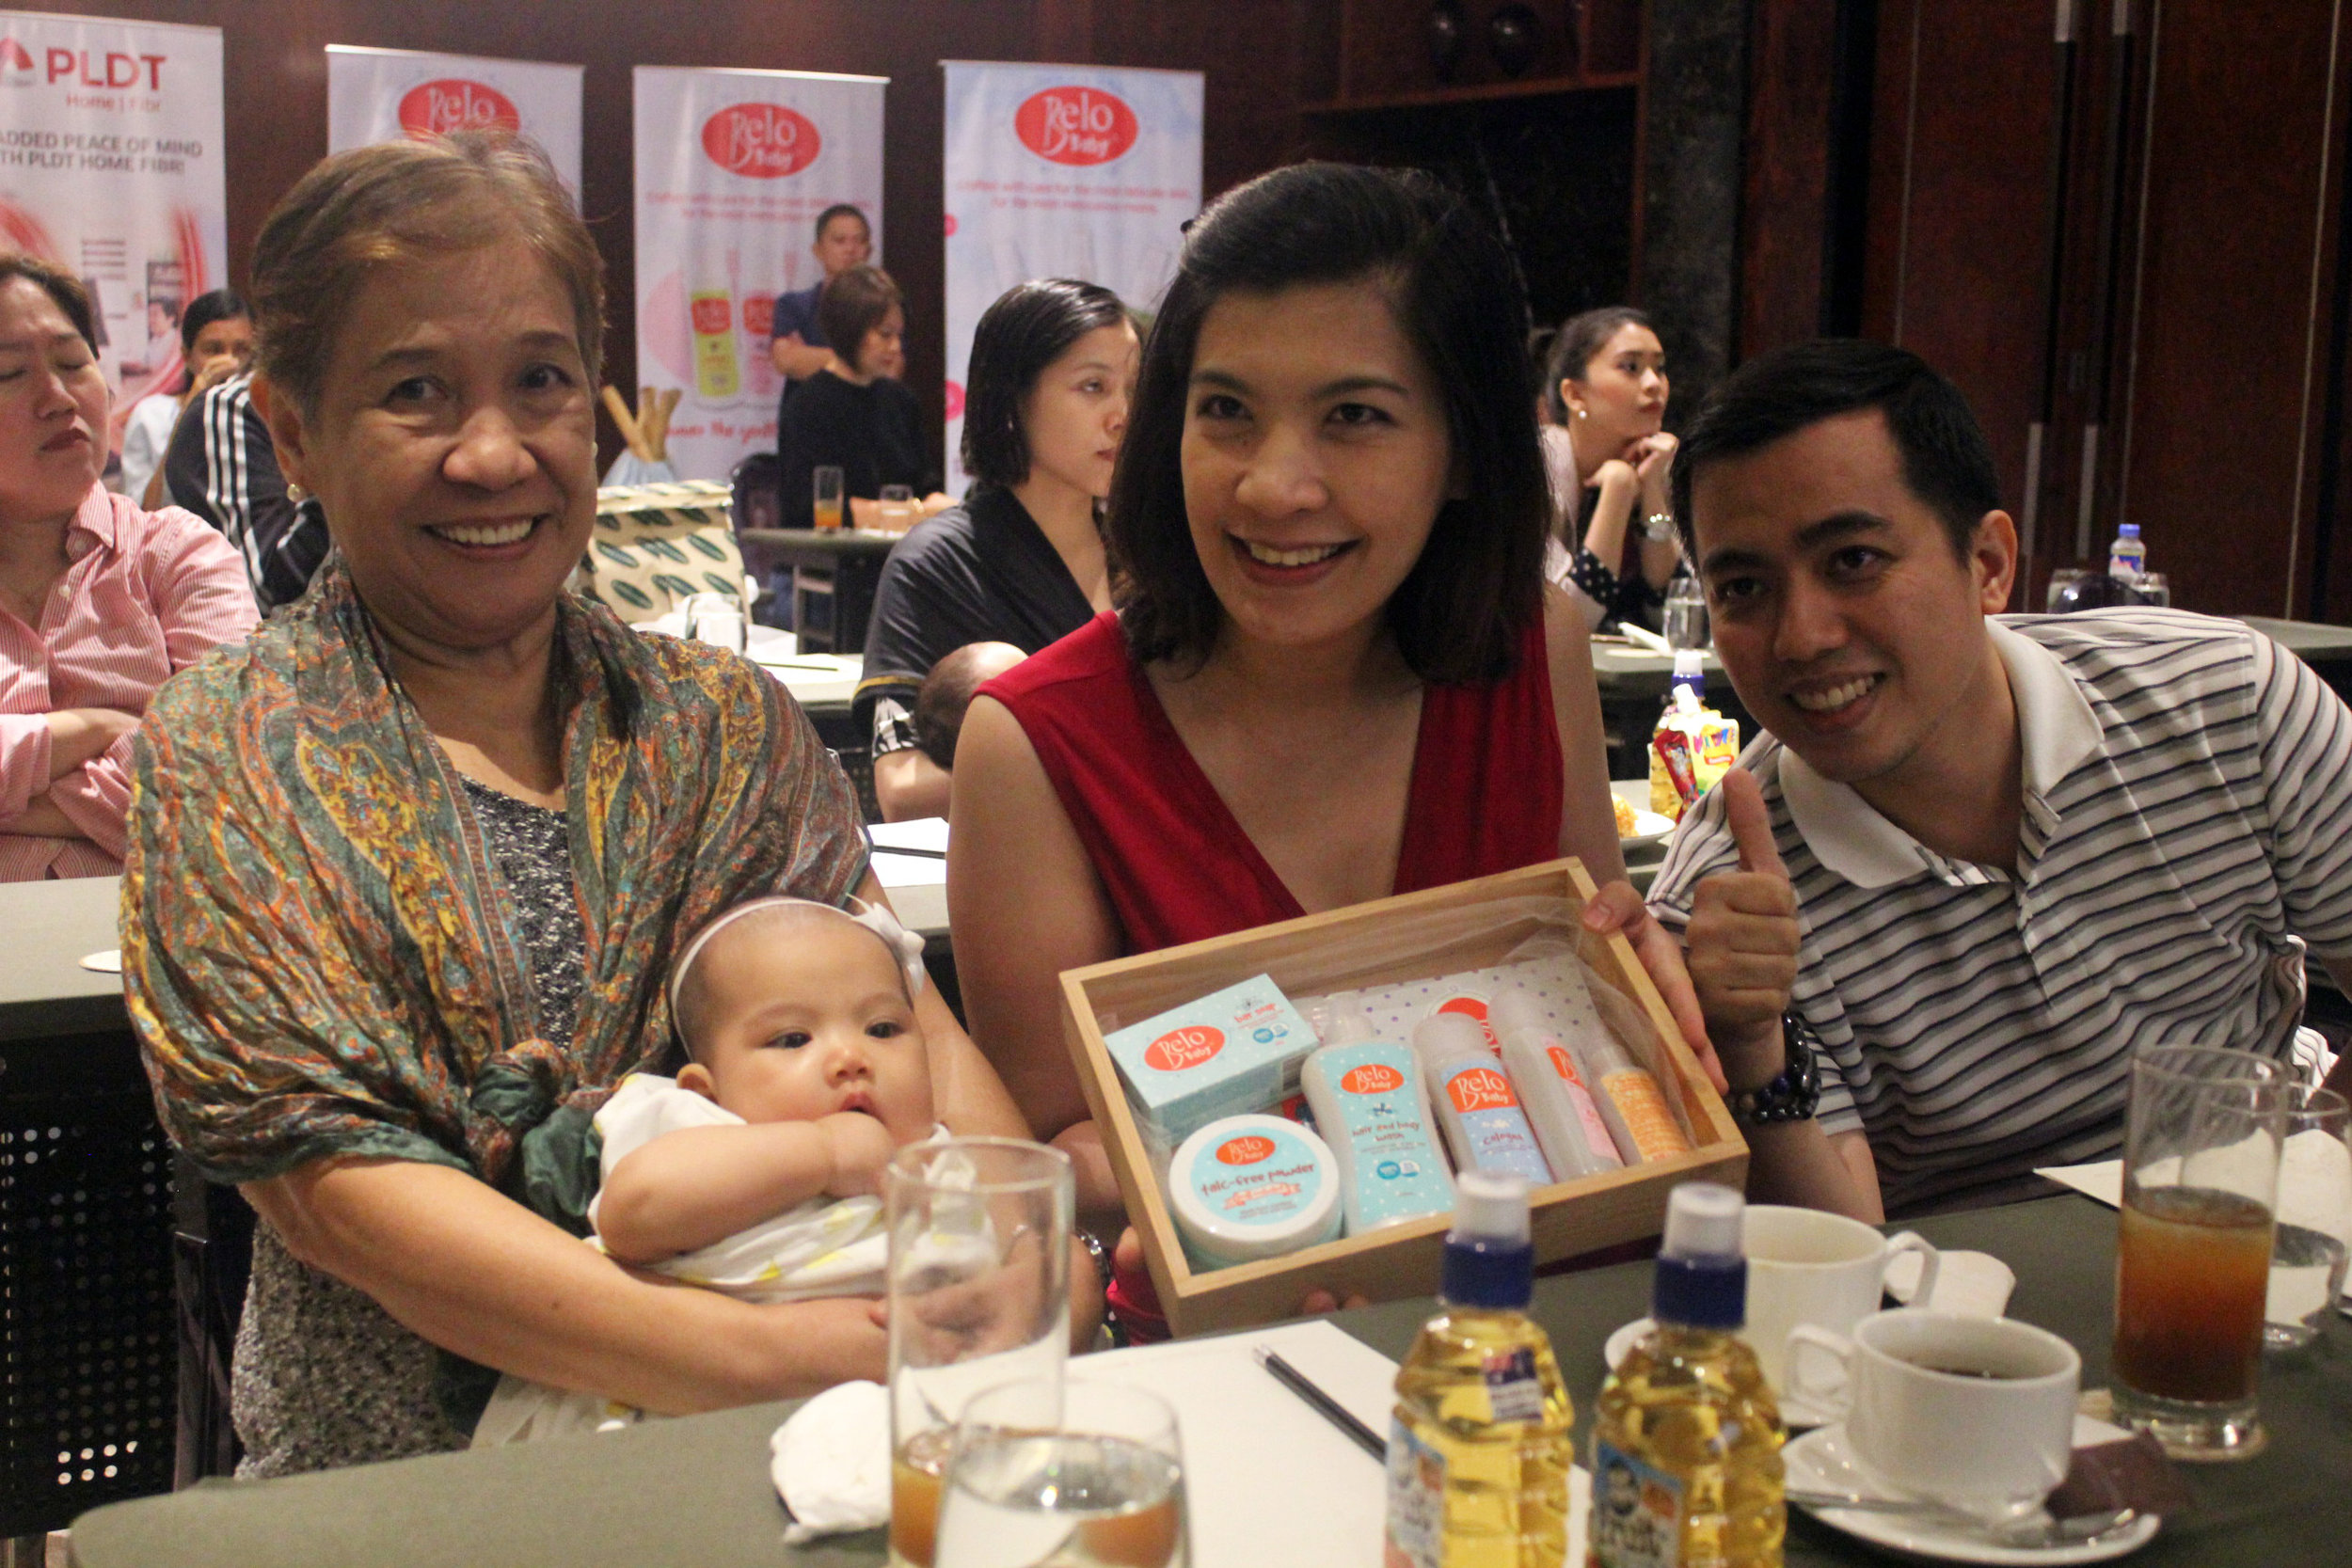 One mom won a gift pack from Belo Baby